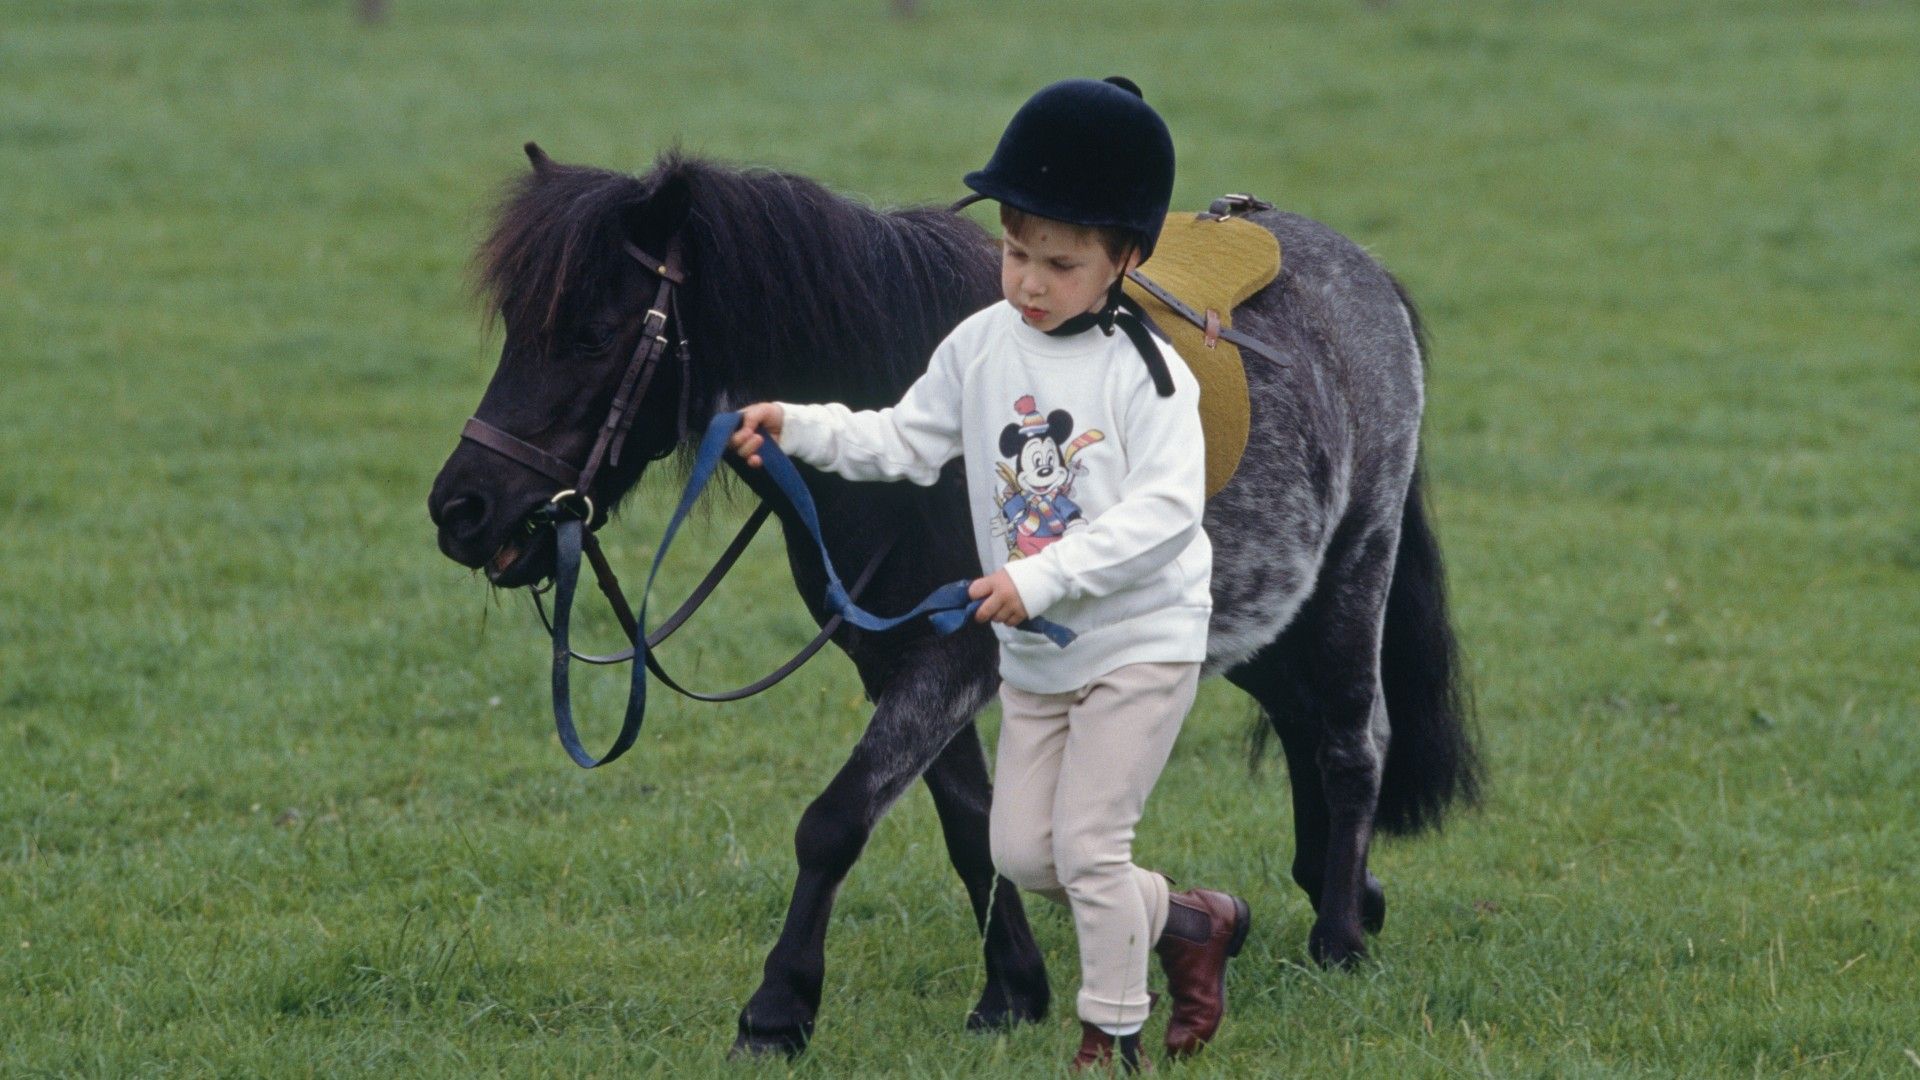 <p>                     A love of horses runs through the Royal Family, with the late Queen Elizabeth having a lifelong affinity.                   </p>                                      <p>                     Like the young Queen who got her first pony as a young child, this heart-warming photo of a young Prince William shows his natural touch with animals as he gently steers a pony around a field.                   </p>                                      <p>                     Extra sweet points for his Mickey Mouse jumper.                   </p>